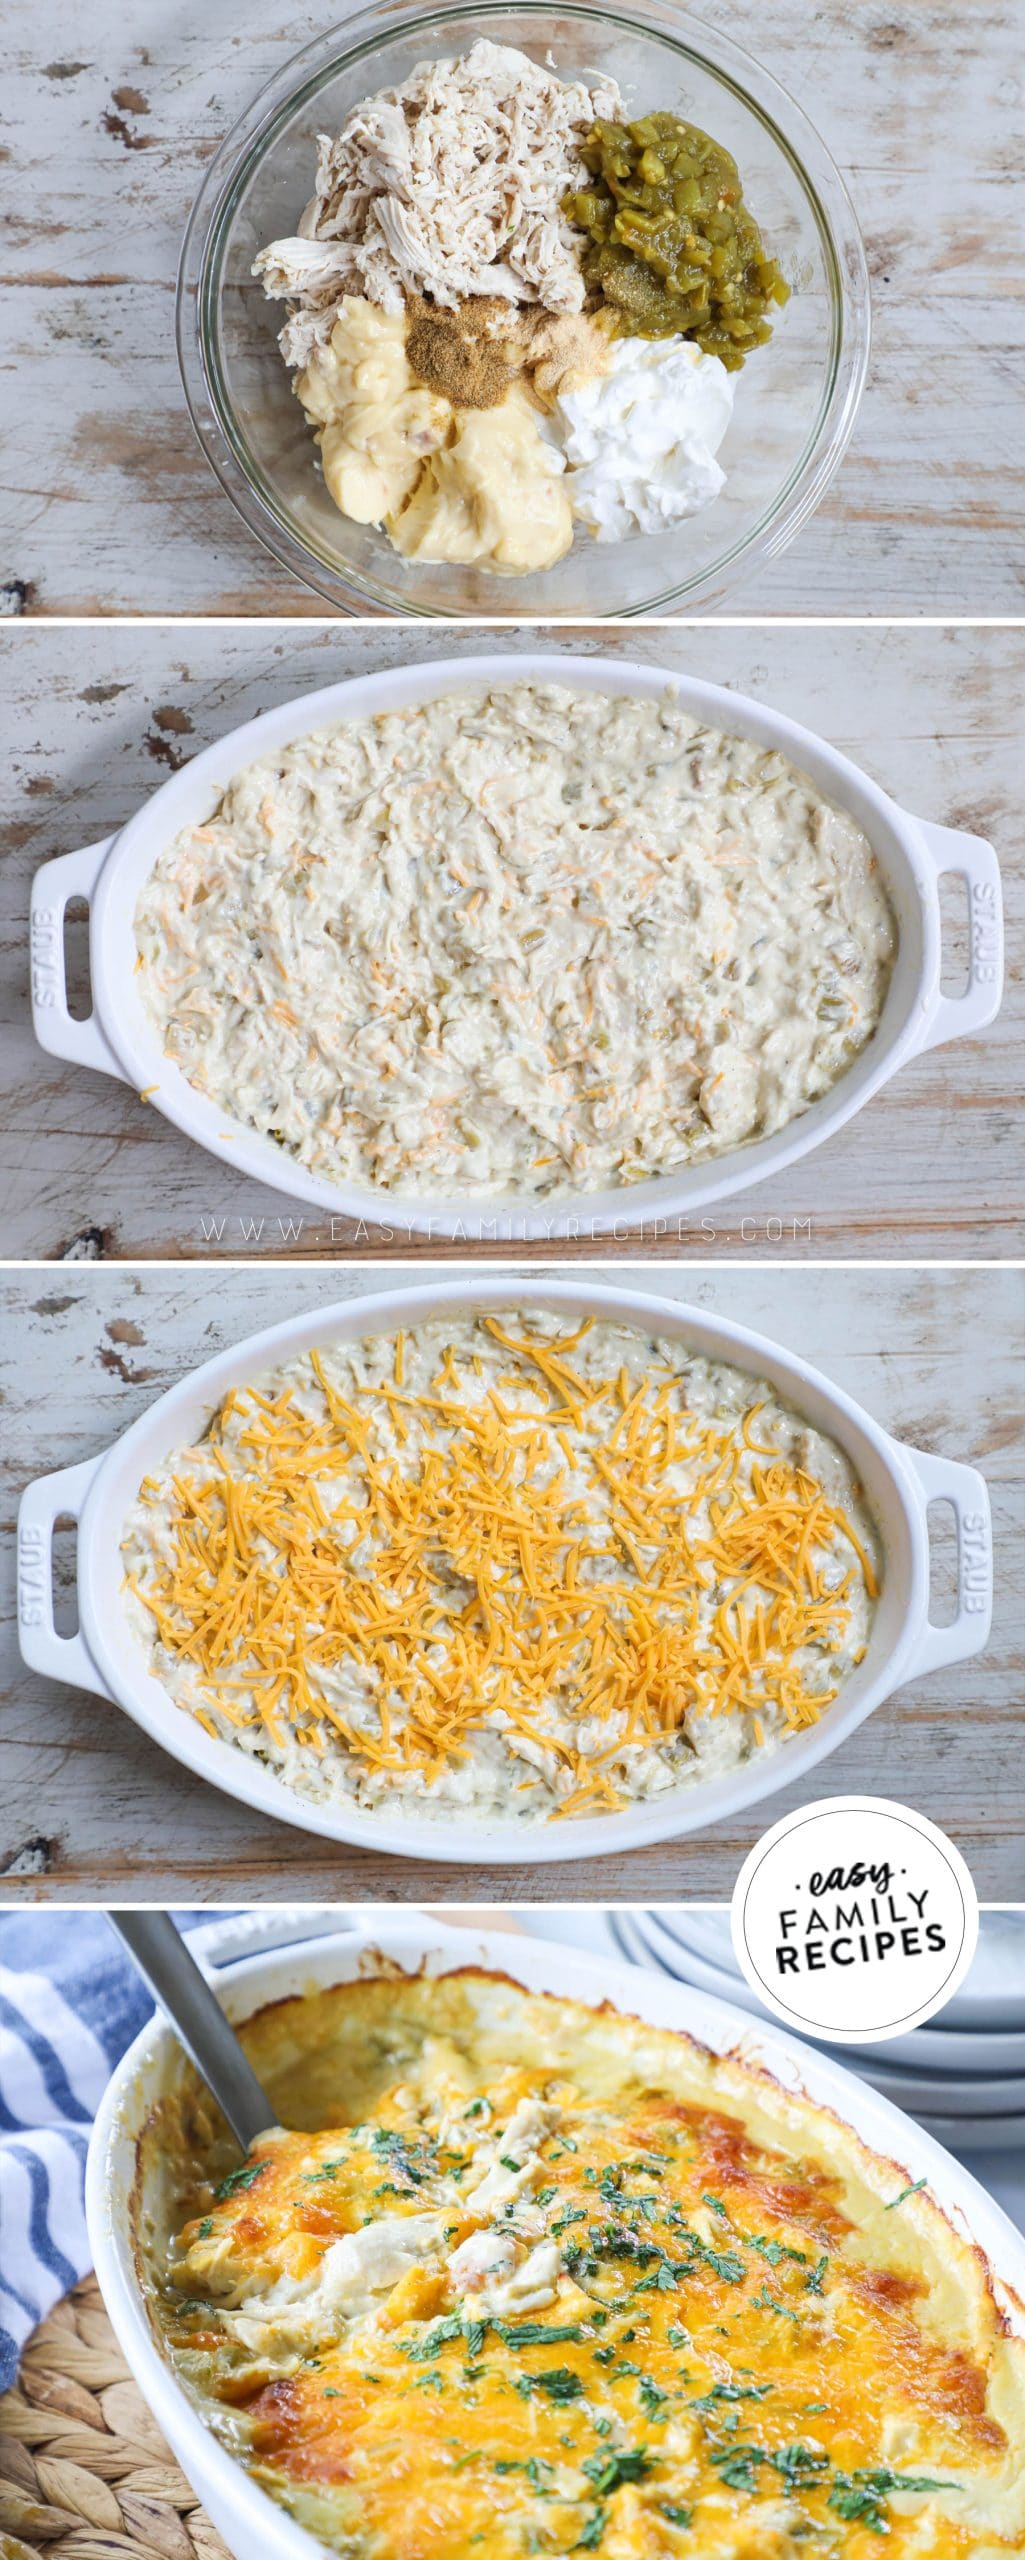 How to make Green Chile Chicken Casserole- 1. Combine rotisserie chicken, cream of chicken soup, green chiles, sour cream, and seasonings. 2. Spread mixture in a casserole dish. 3. Top with cheese and bake. 4. Serve with rice and beans